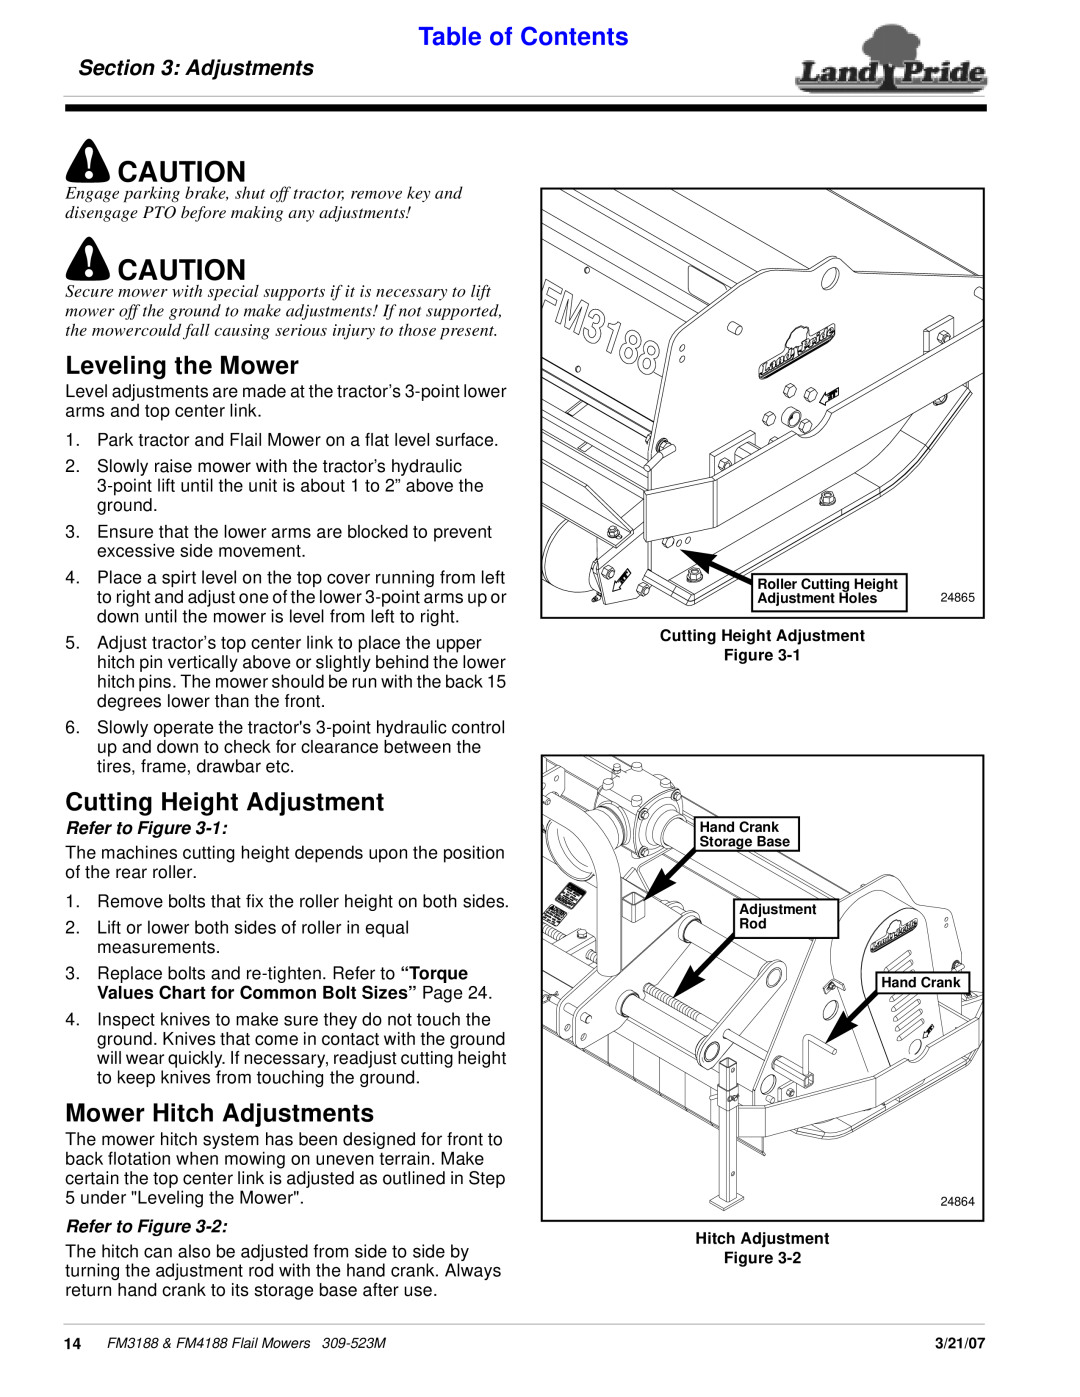 Land Pride FM4188, FM3188 manual Leveling the Mower, Cutting Height Adjustment, Mower Hitch Adjustments, Table of Contents 